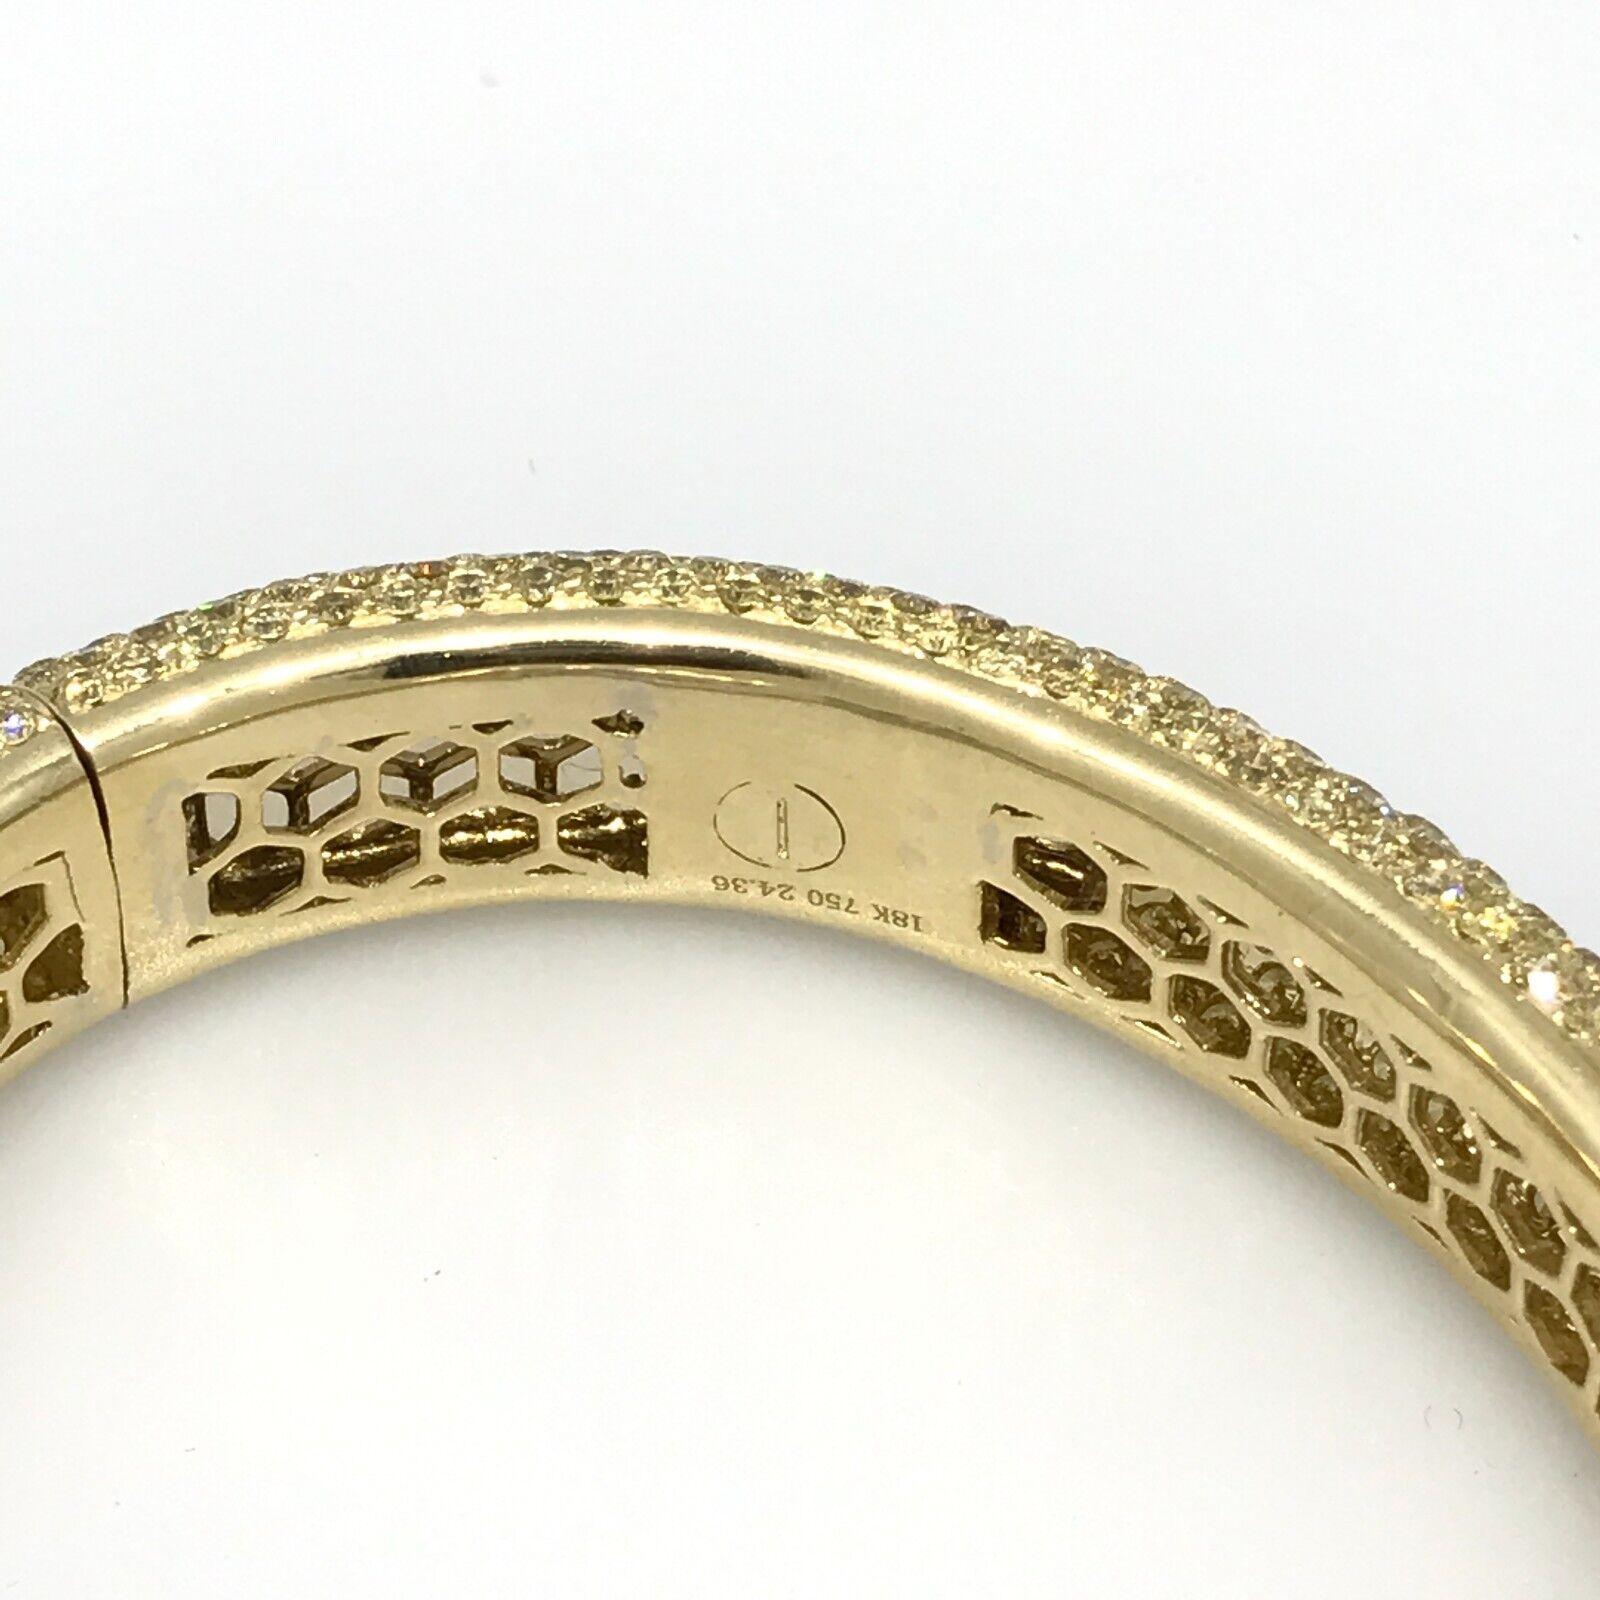 Natural Yellow Diamond Pave Eternity Bracelet 24.36 Carats in 18k Yellow Gold In Excellent Condition For Sale In La Jolla, CA